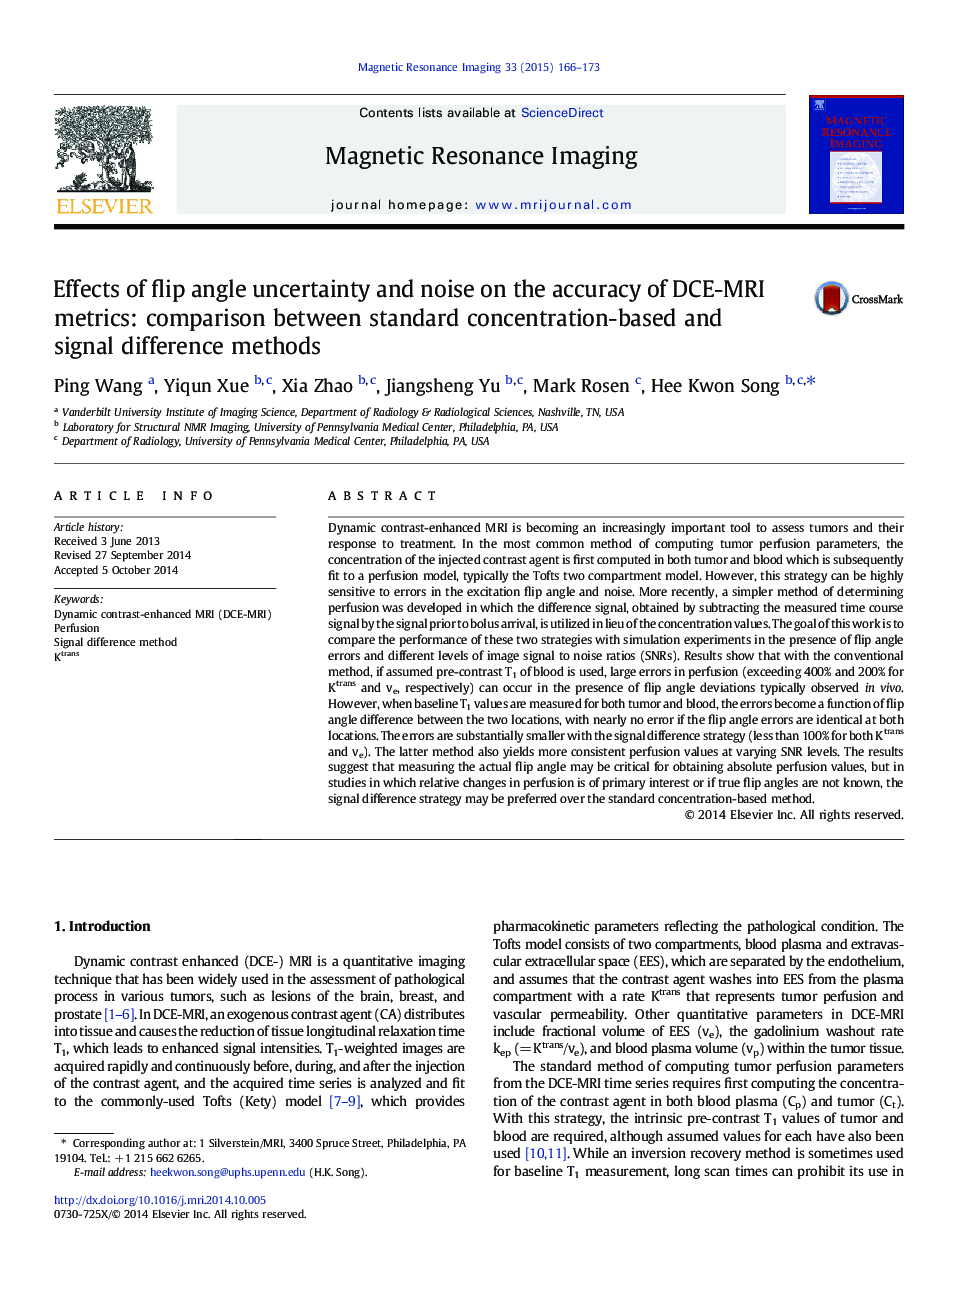 Effects of flip angle uncertainty and noise on the accuracy of DCE-MRI metrics: comparison between standard concentration-based and signal difference methods